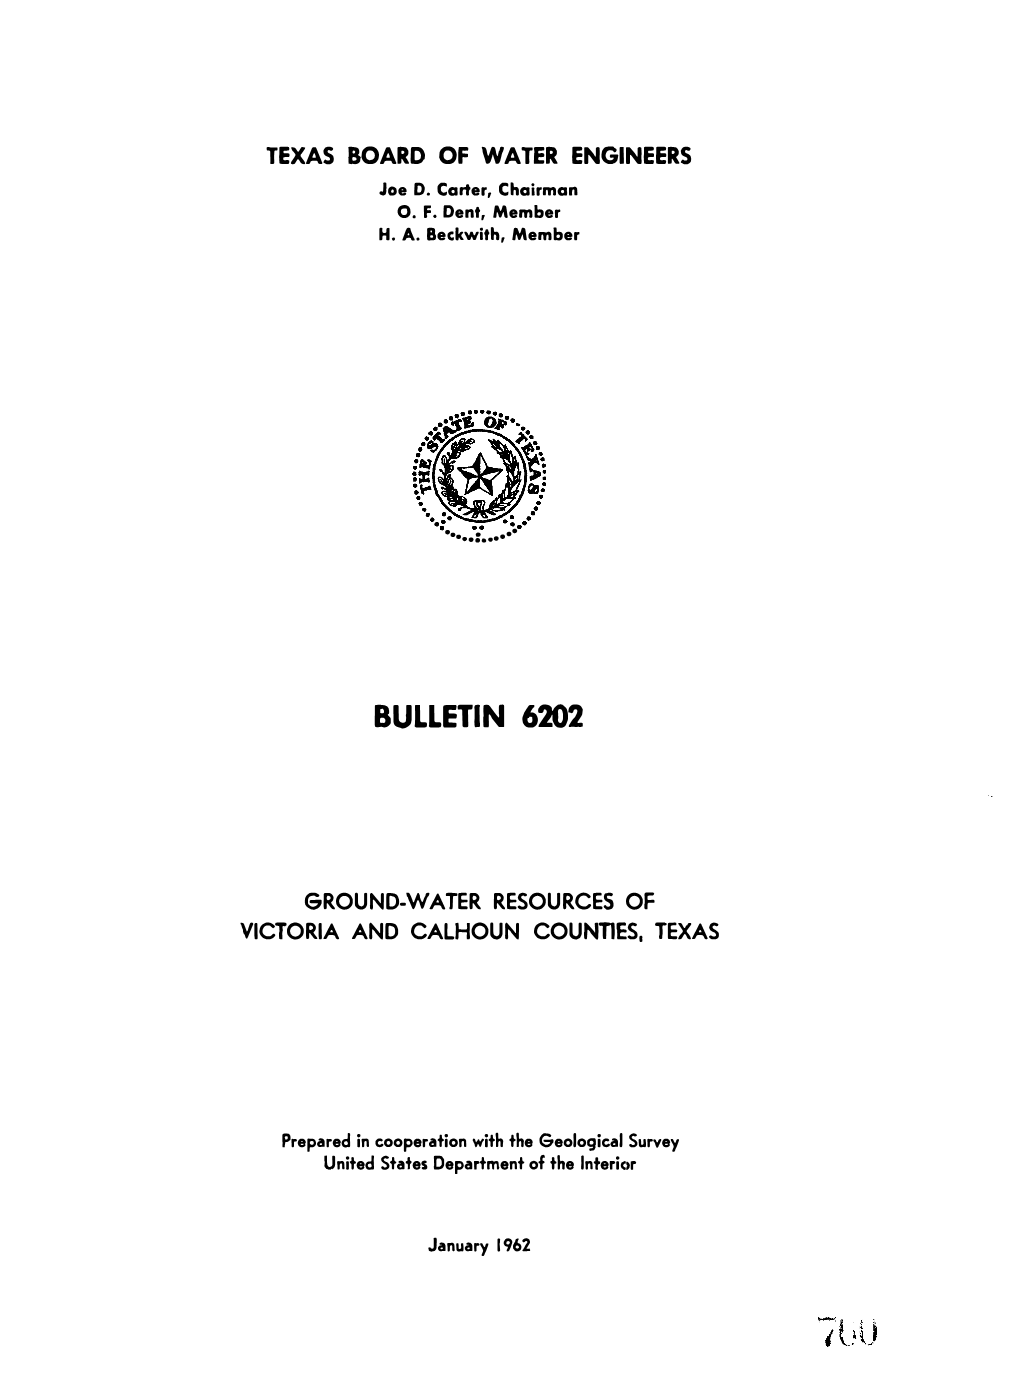 Ground-Water Resources of Victoria and Calhoun Counties, Texas